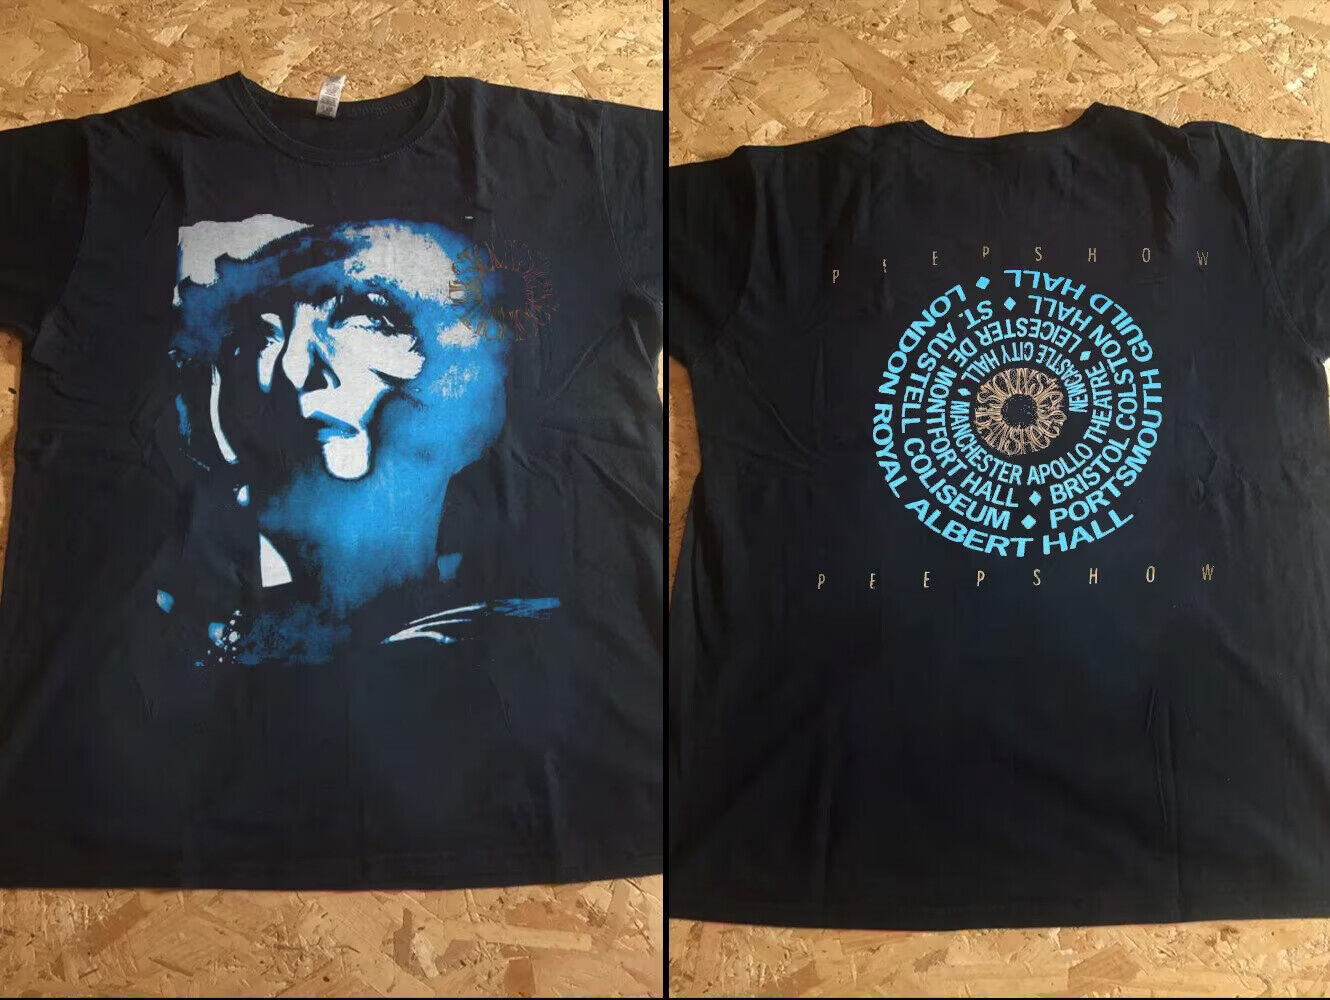 1988 Siouxsie And The Banshees Peepshow United Kingdom Tour T-Shirt